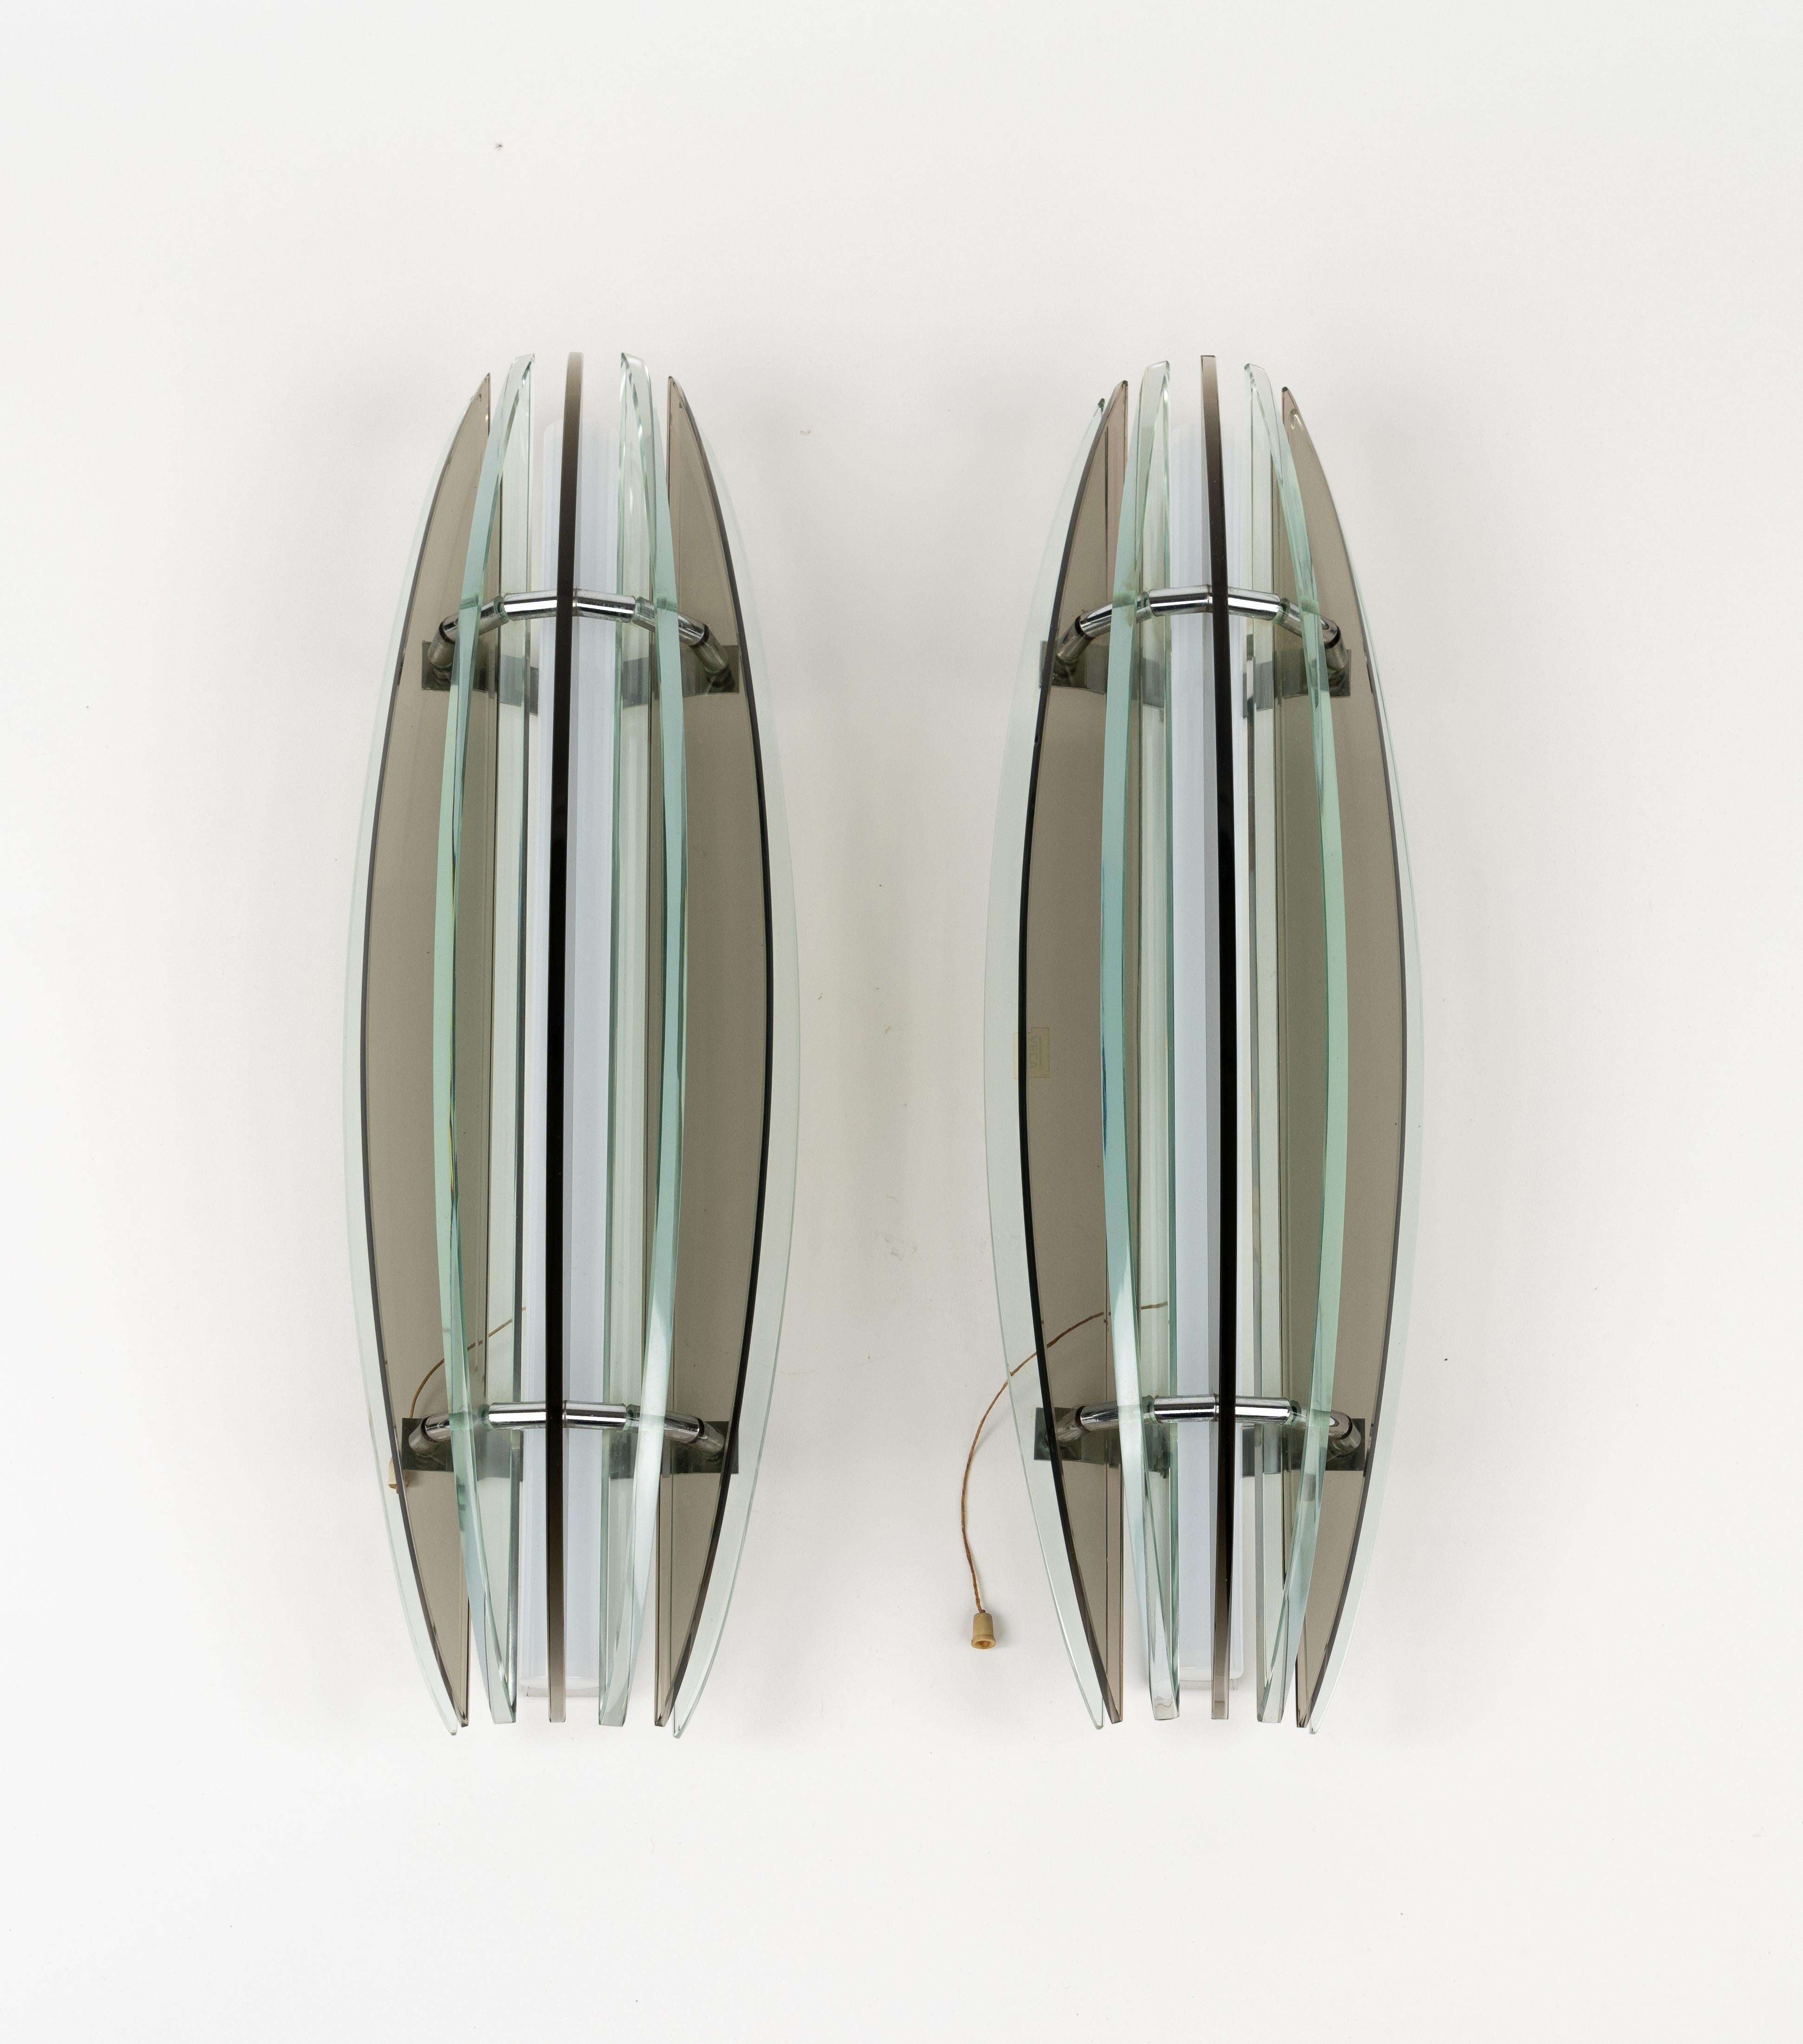 Late 20th Century Midcentury Large Pair of Sconces in Colored Glass & Chrome by Veca, Italy, 1970s For Sale